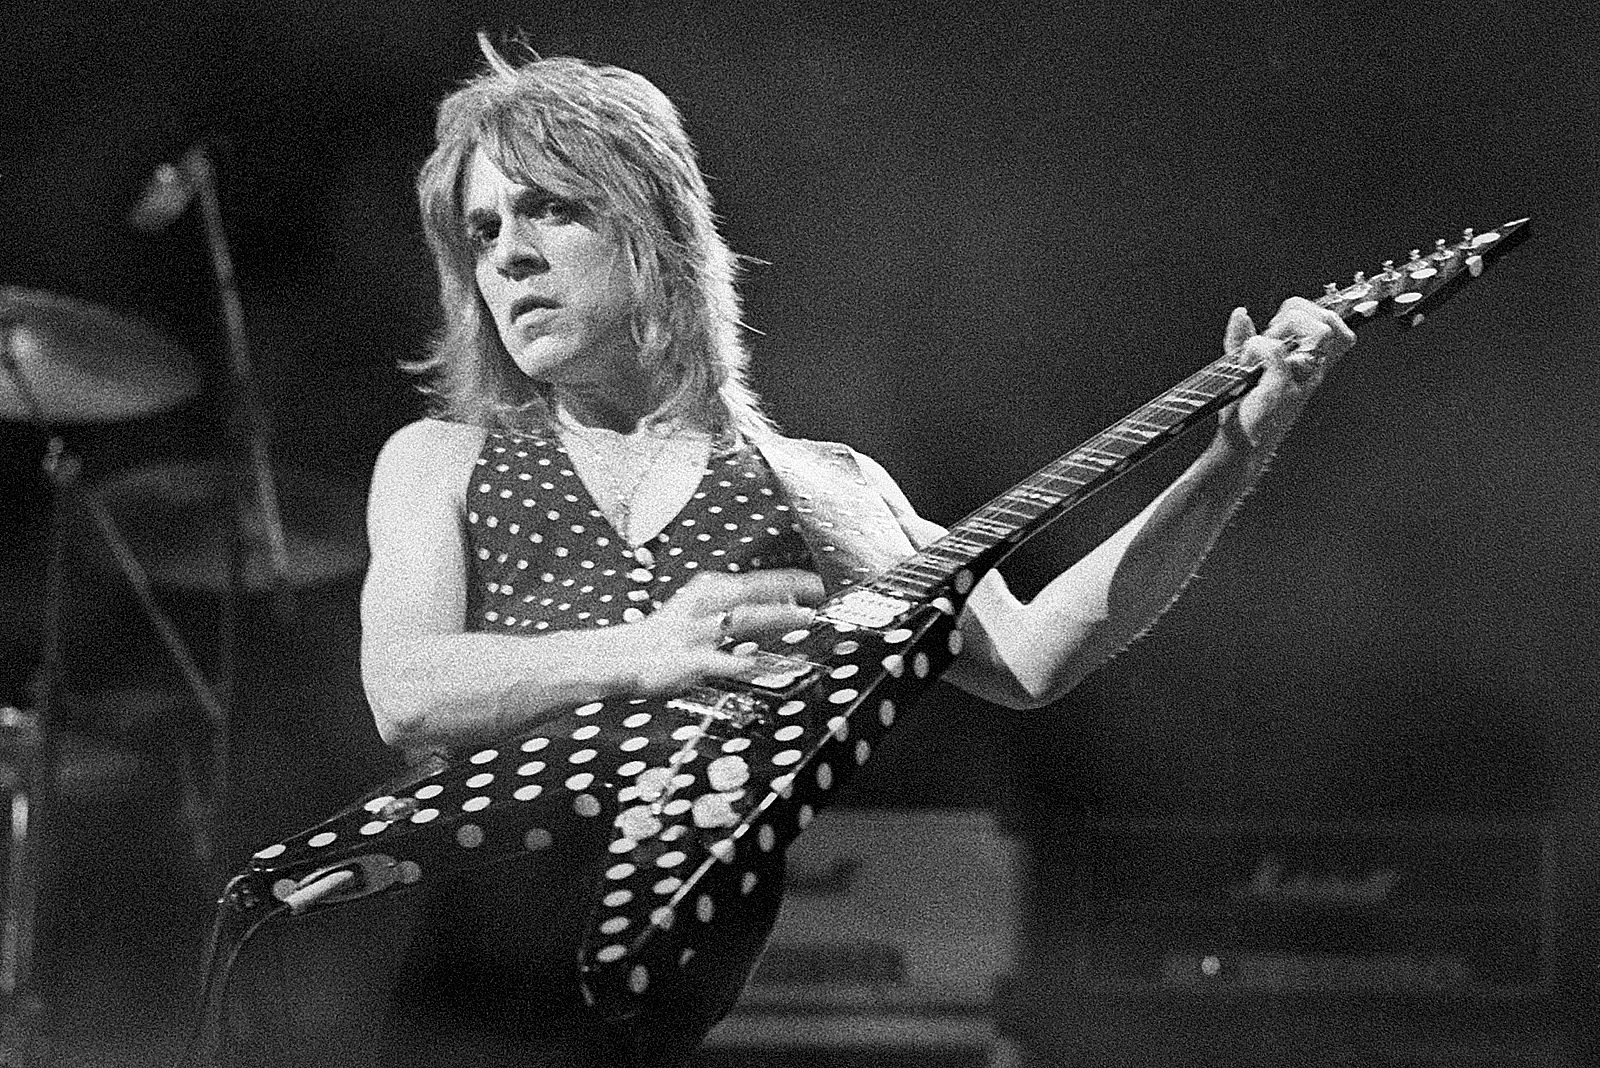 Randy Rhoads Receives Rock Hall Musical Excellence